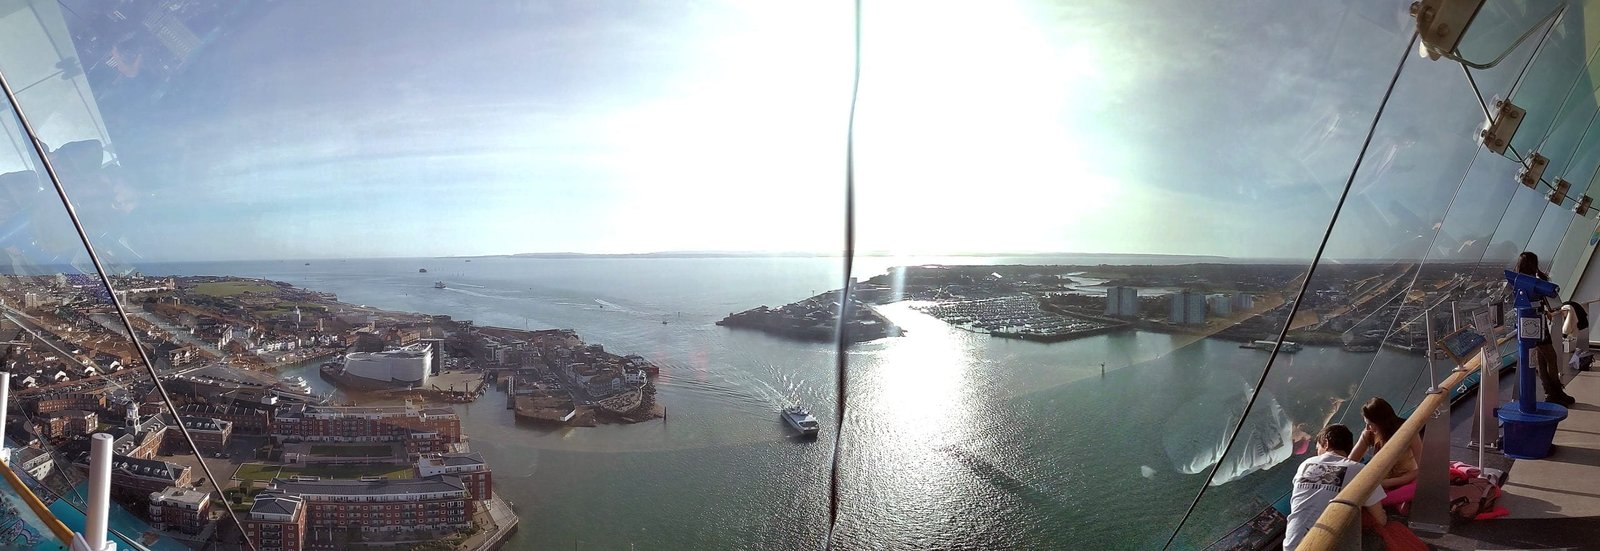 The View From Level One of Spinnaker Tower